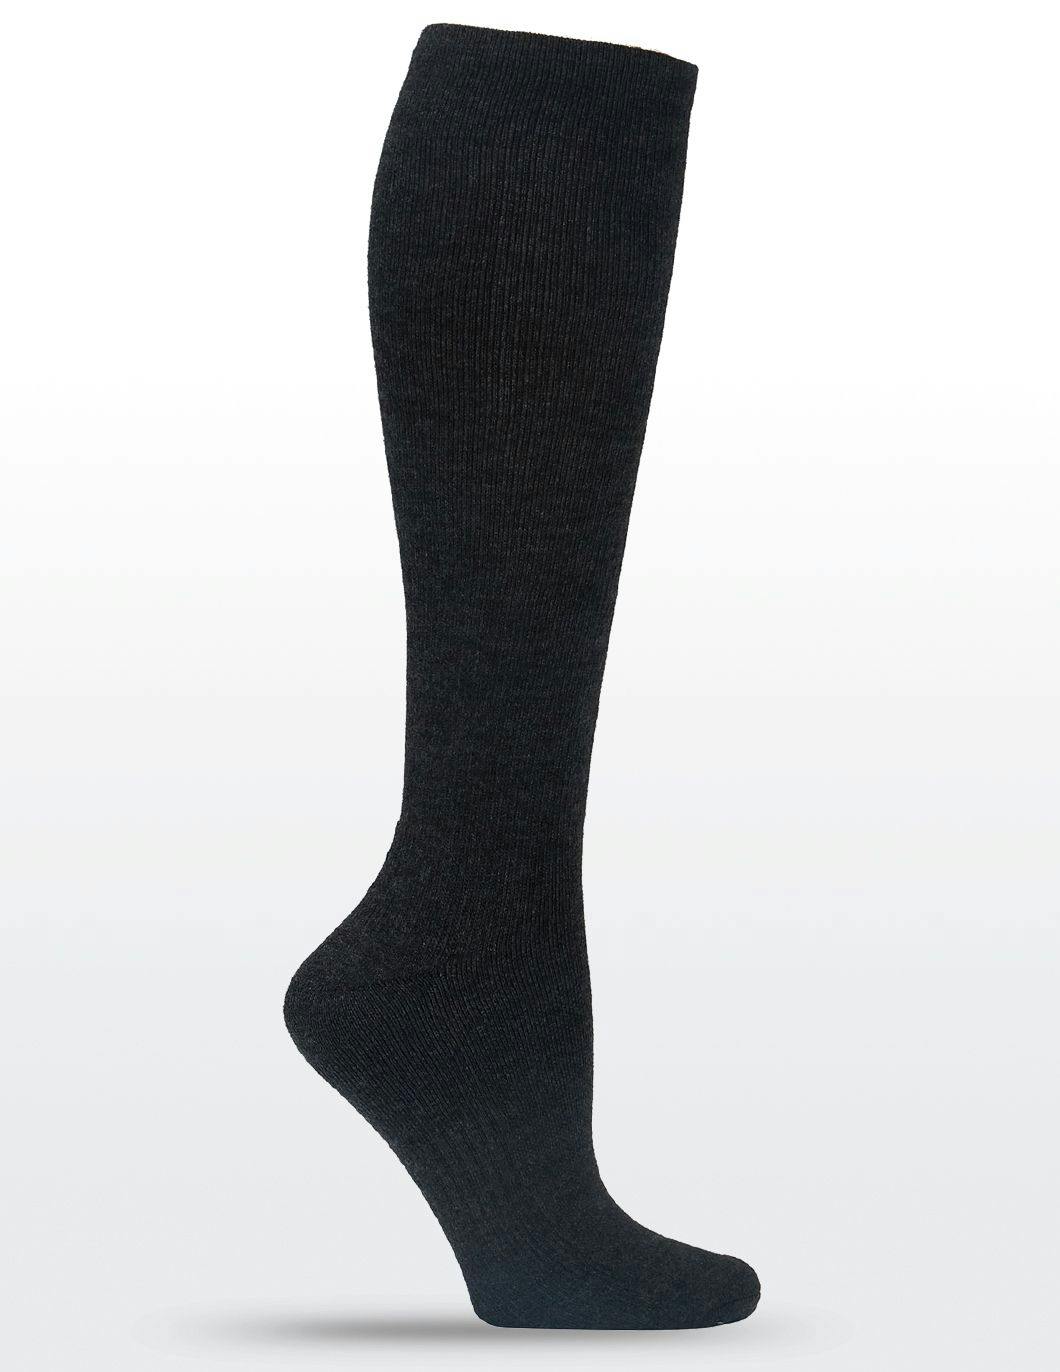 cherokee-mlx-mens-bamboo-blend-compression-socks-bespeckled